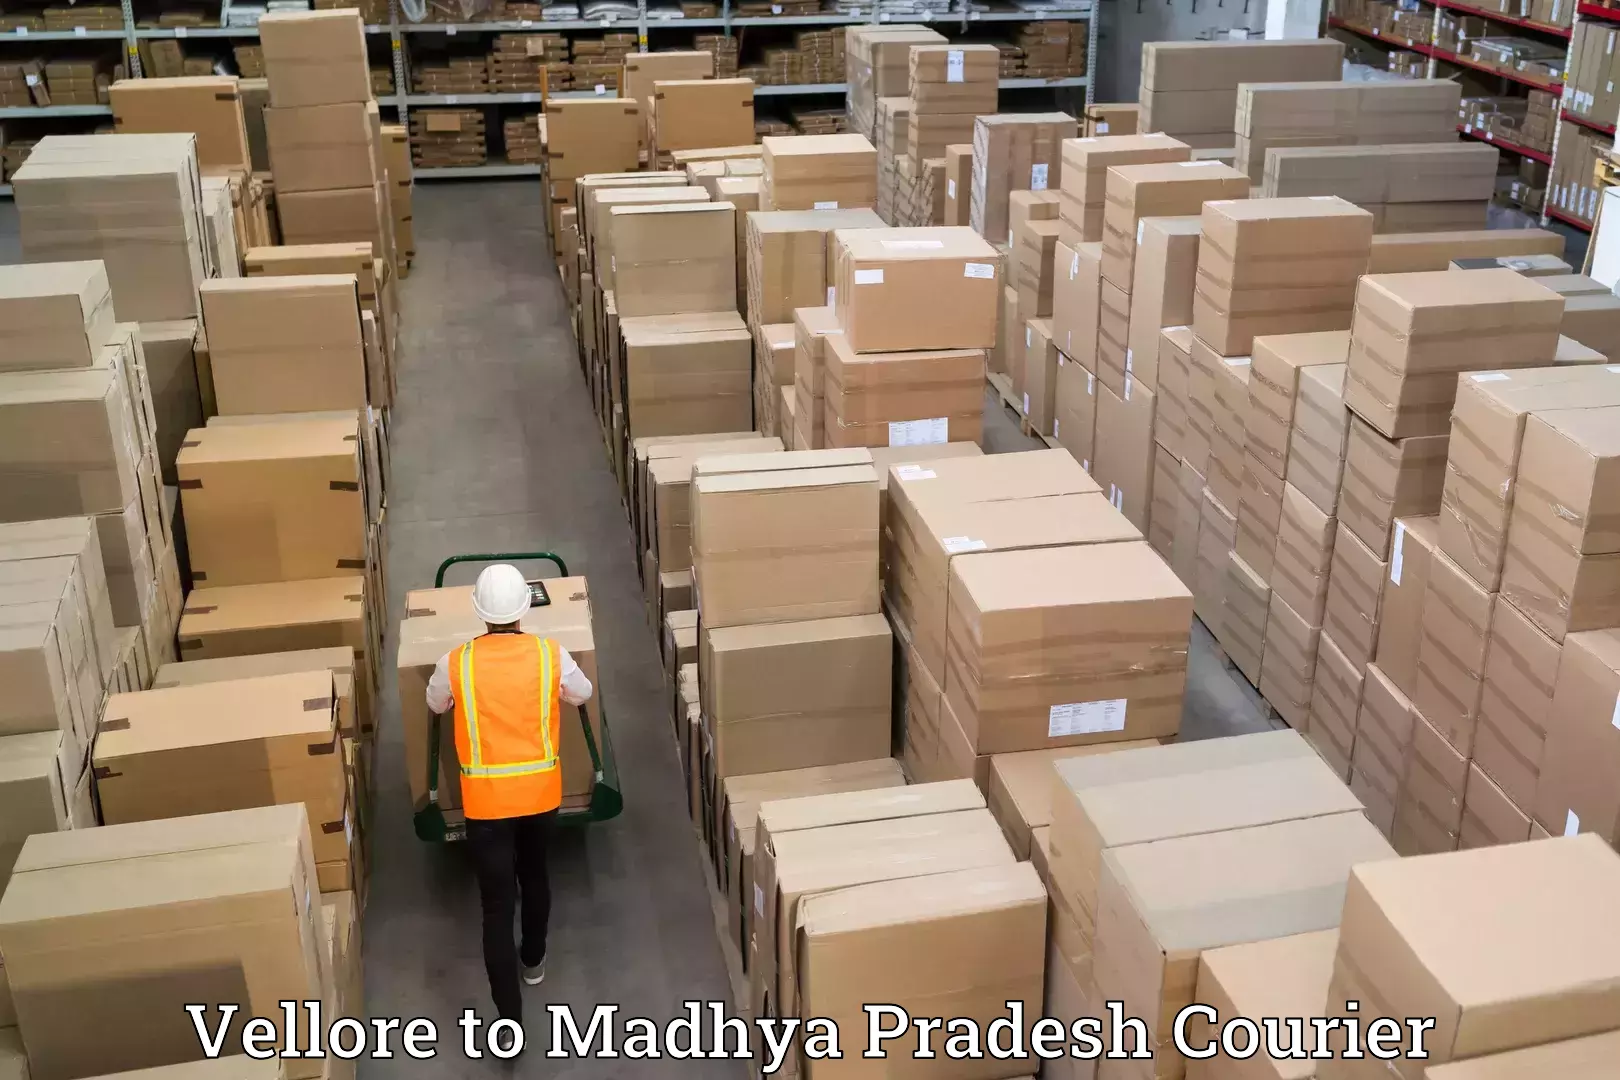 Trusted relocation experts Vellore to Madhya Pradesh